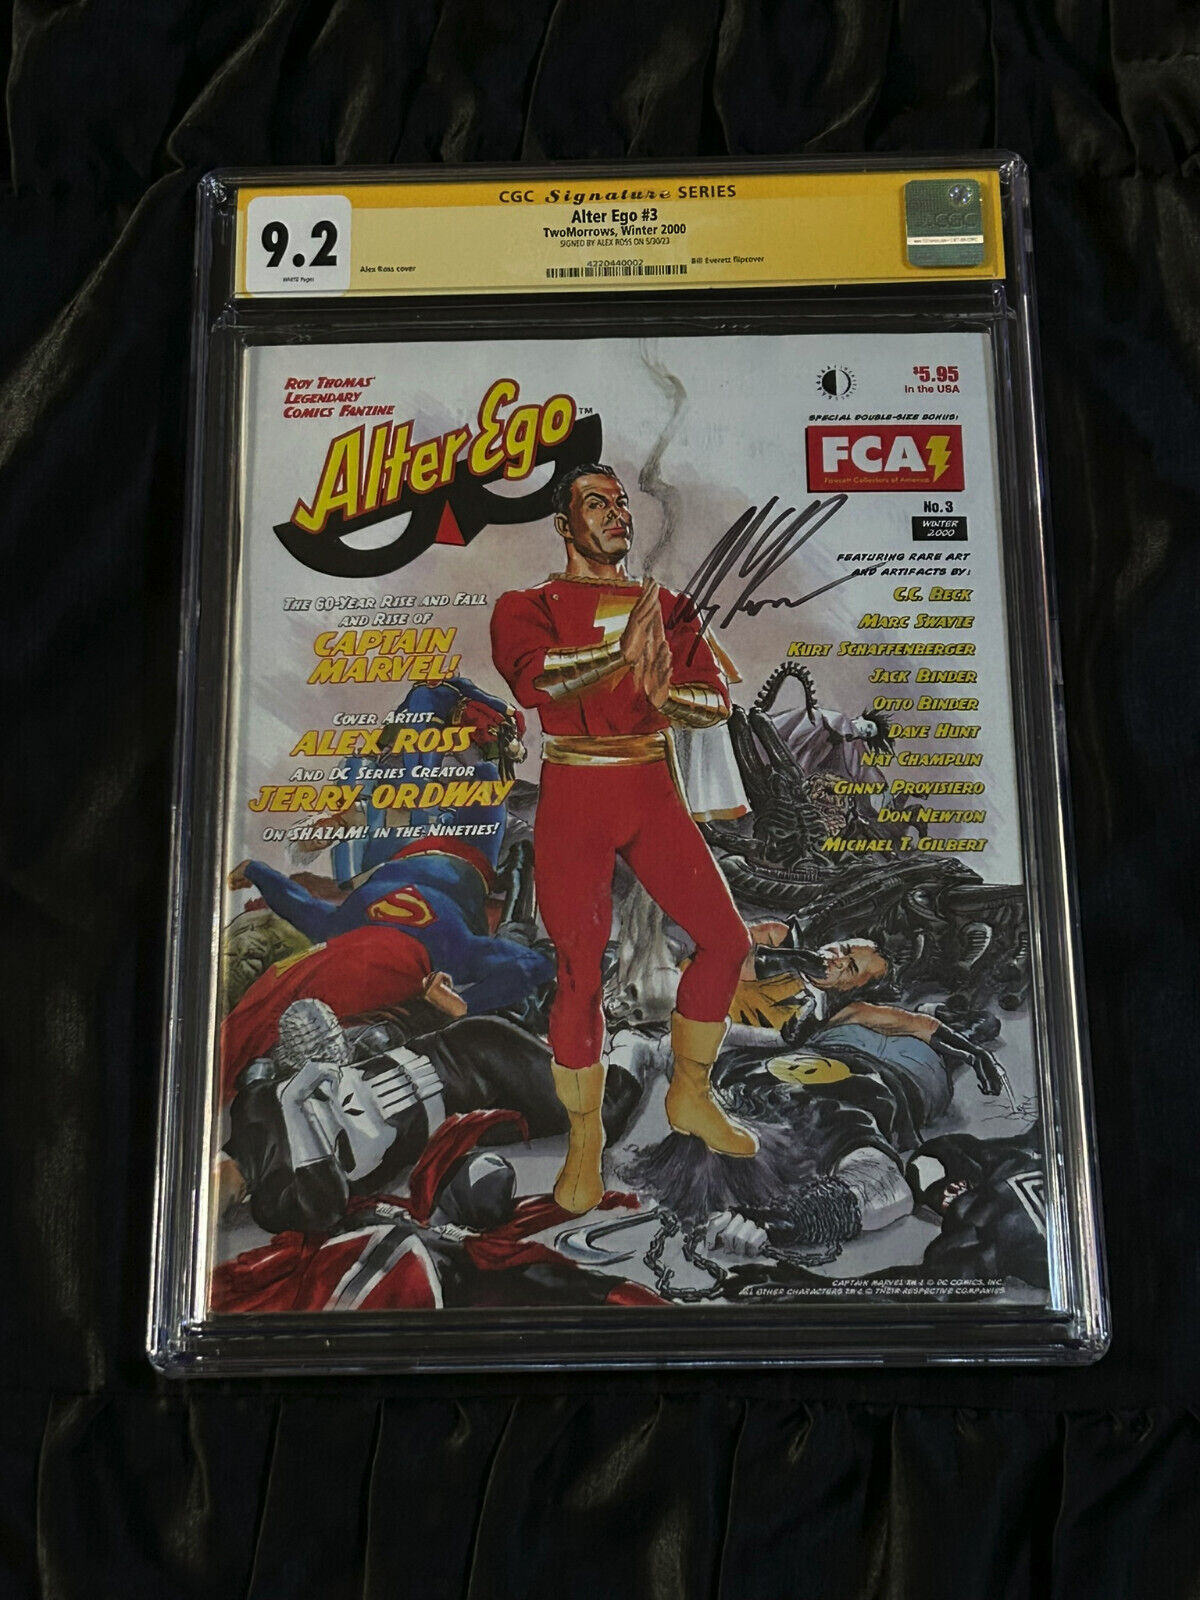 TwoMorrows 2000 Alter Ego #3 CGC 9.2 NM- with White Pages Alex Ross SIGNED Cover